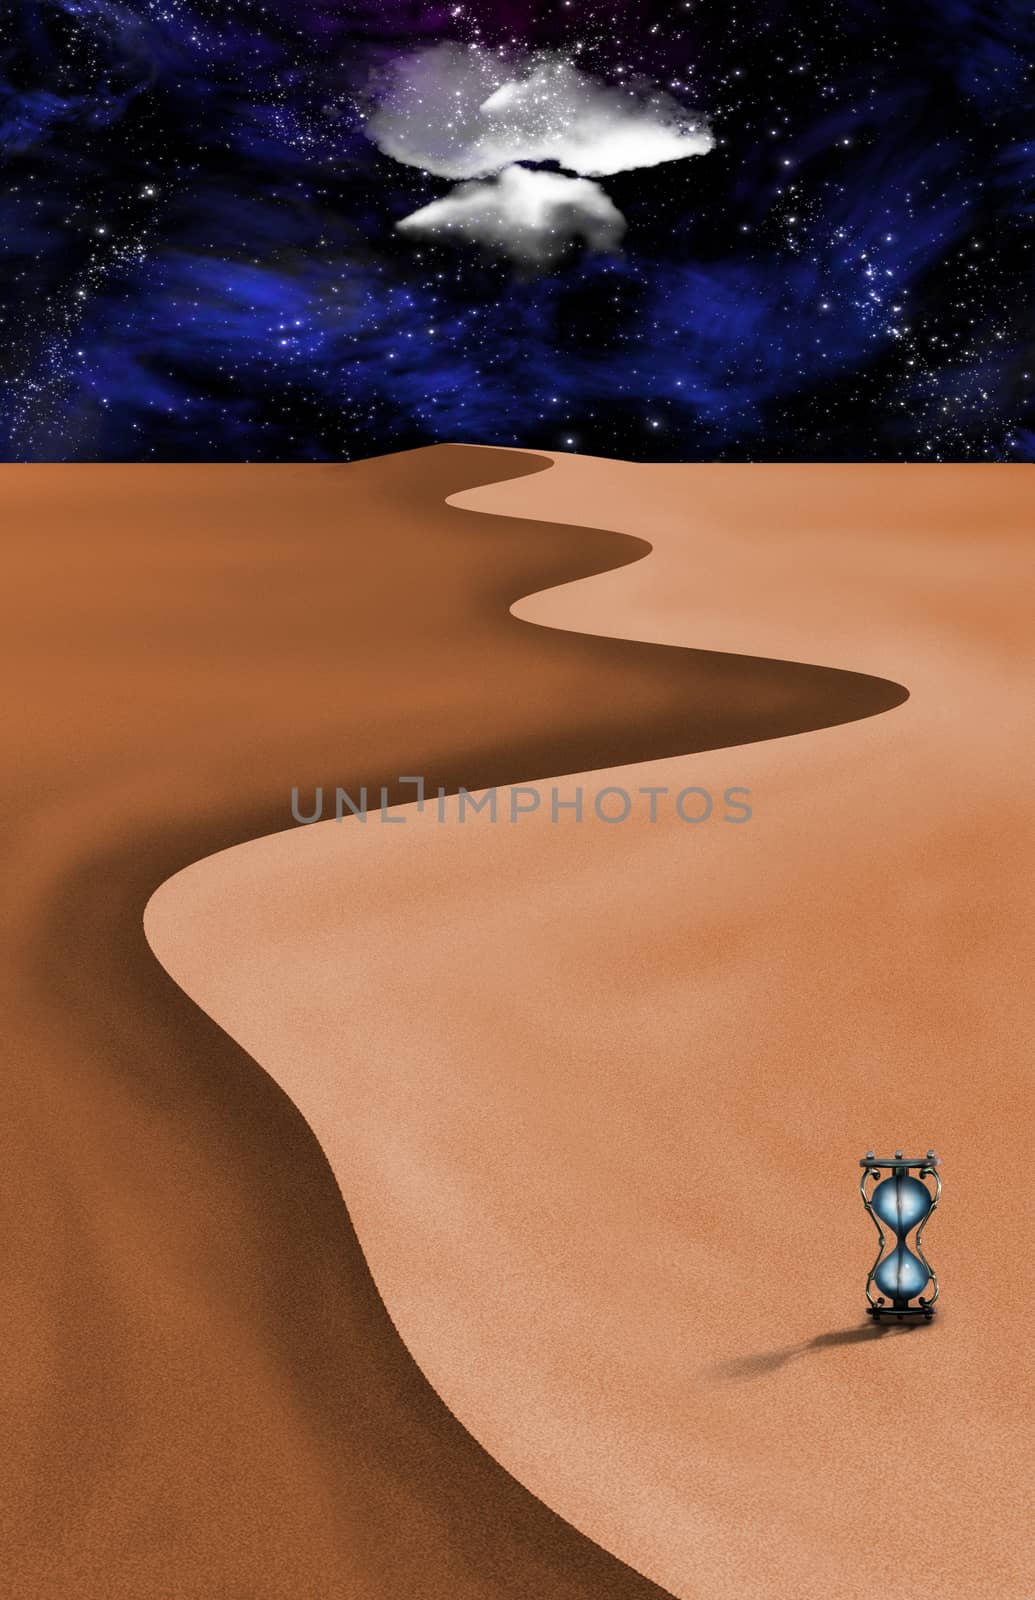 The sands of time by applesstock